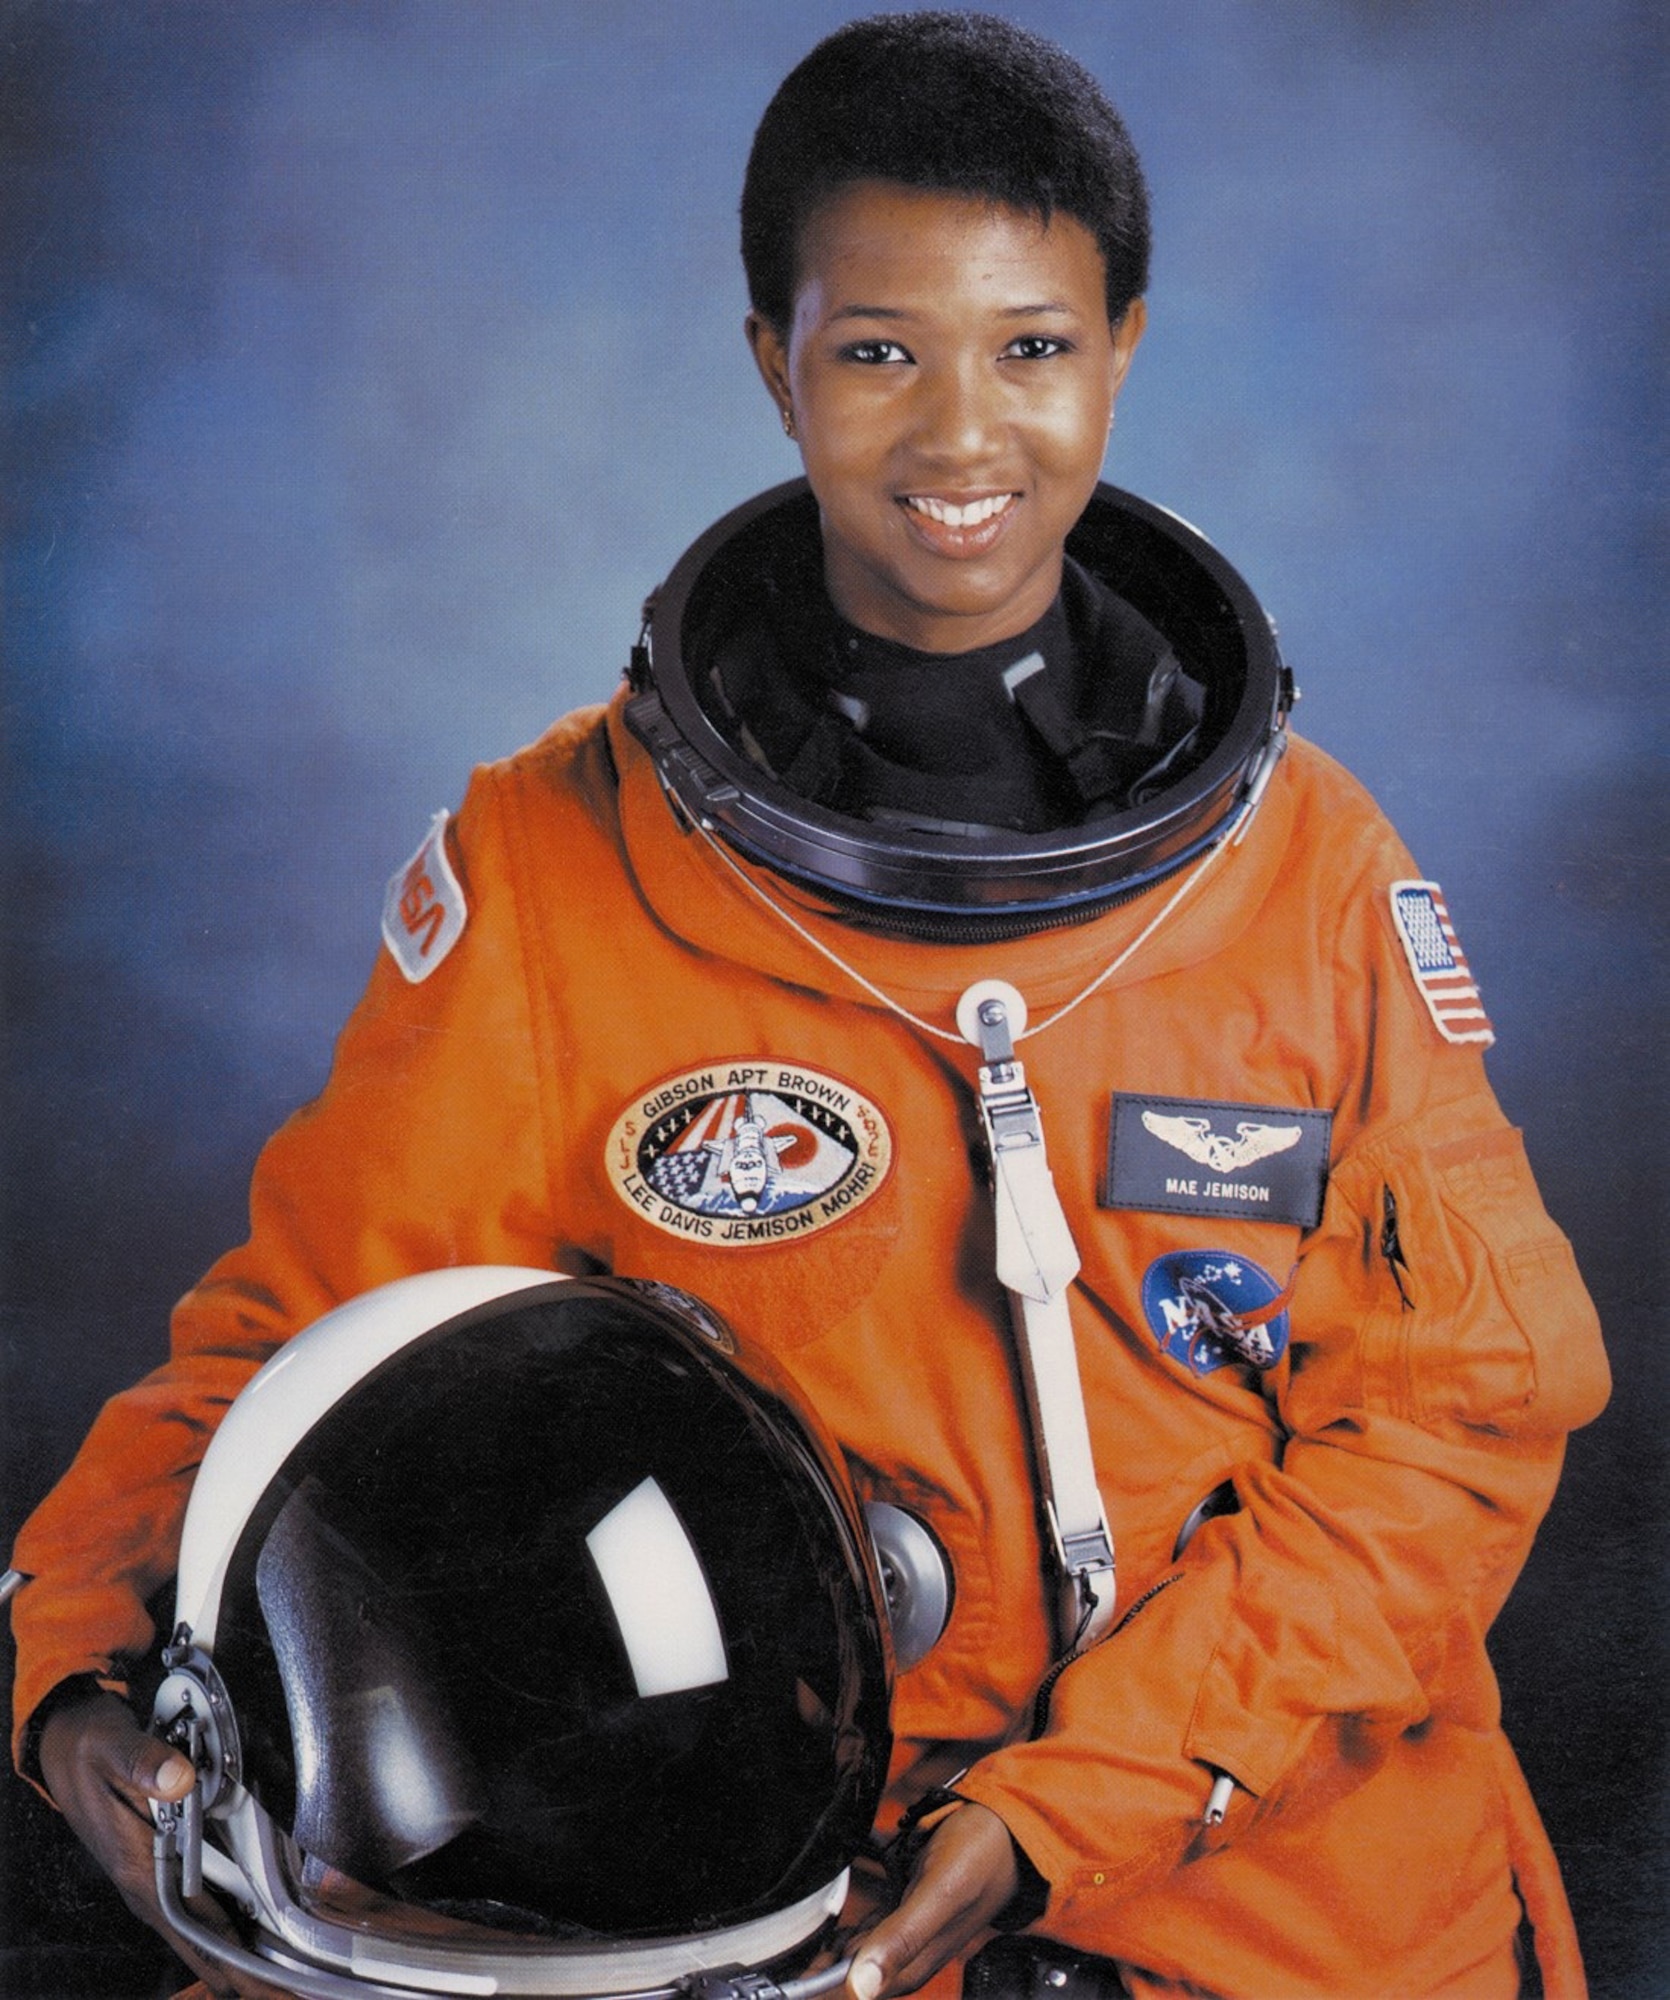 Dr. Mae Jemison was the first African-American woman to travel into space